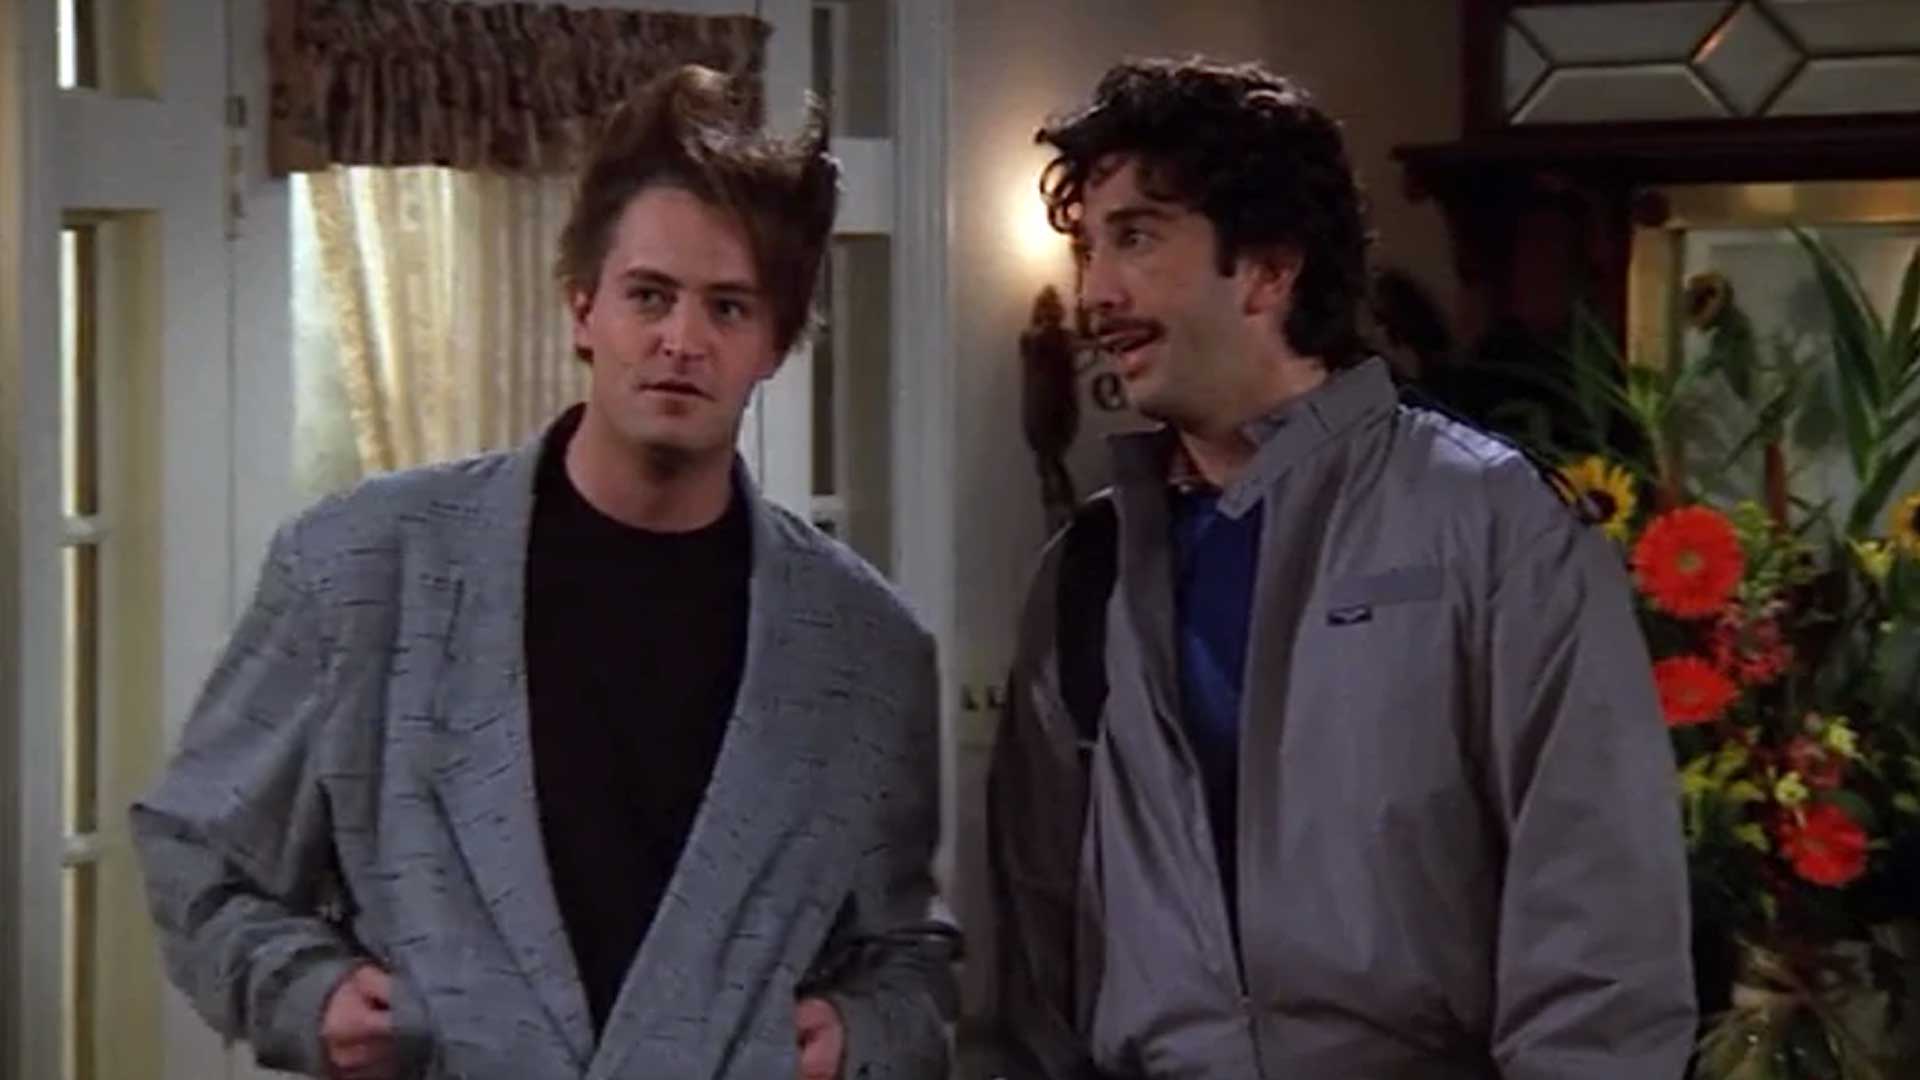 Chandler and Ross at college